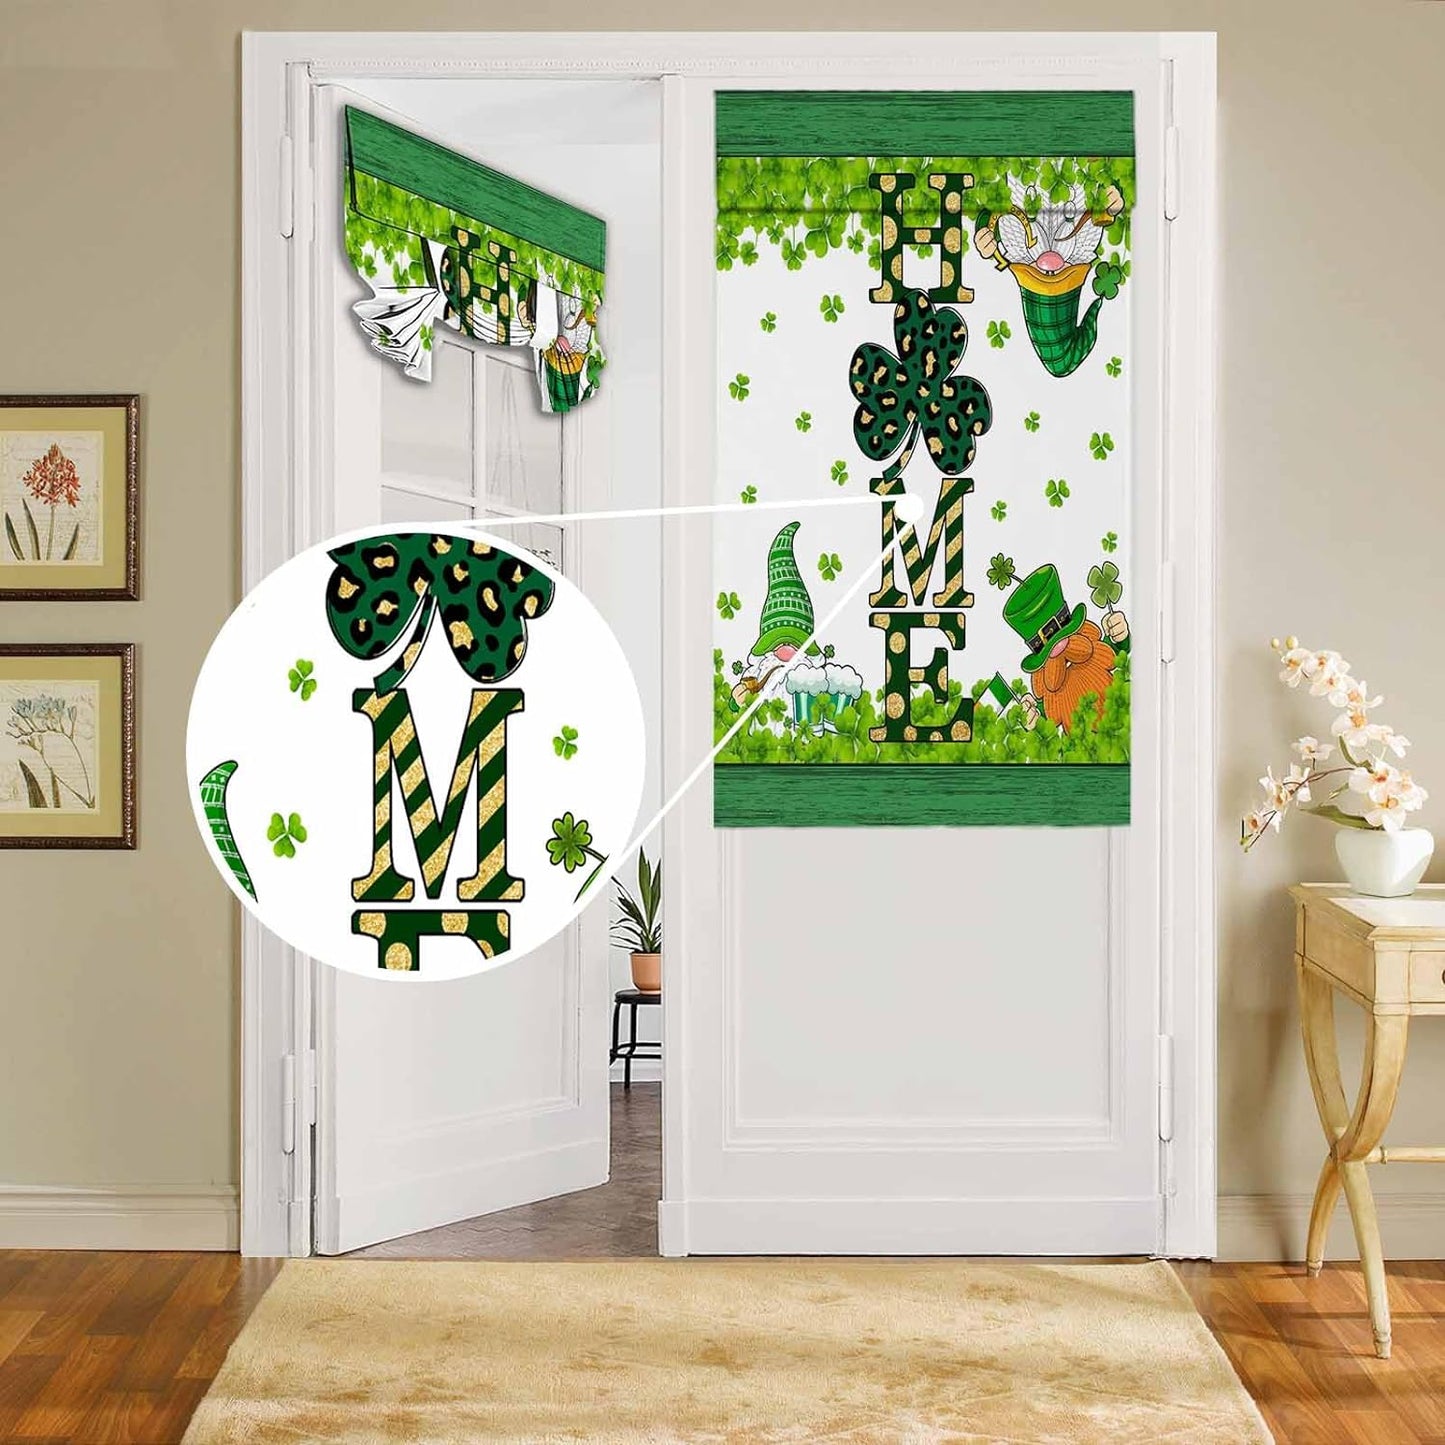 BEMIGO Door Curtains for Door Windows, Vintage Wooden Door Window Curtains for French Glass Door, Privacy Thermal Insulated Tie up Door Shades, Farmhouse Colorful Small Window Curtains 26 X 42 Inch  BEMIGO Green St Patrick 42.00" X 26.00" 